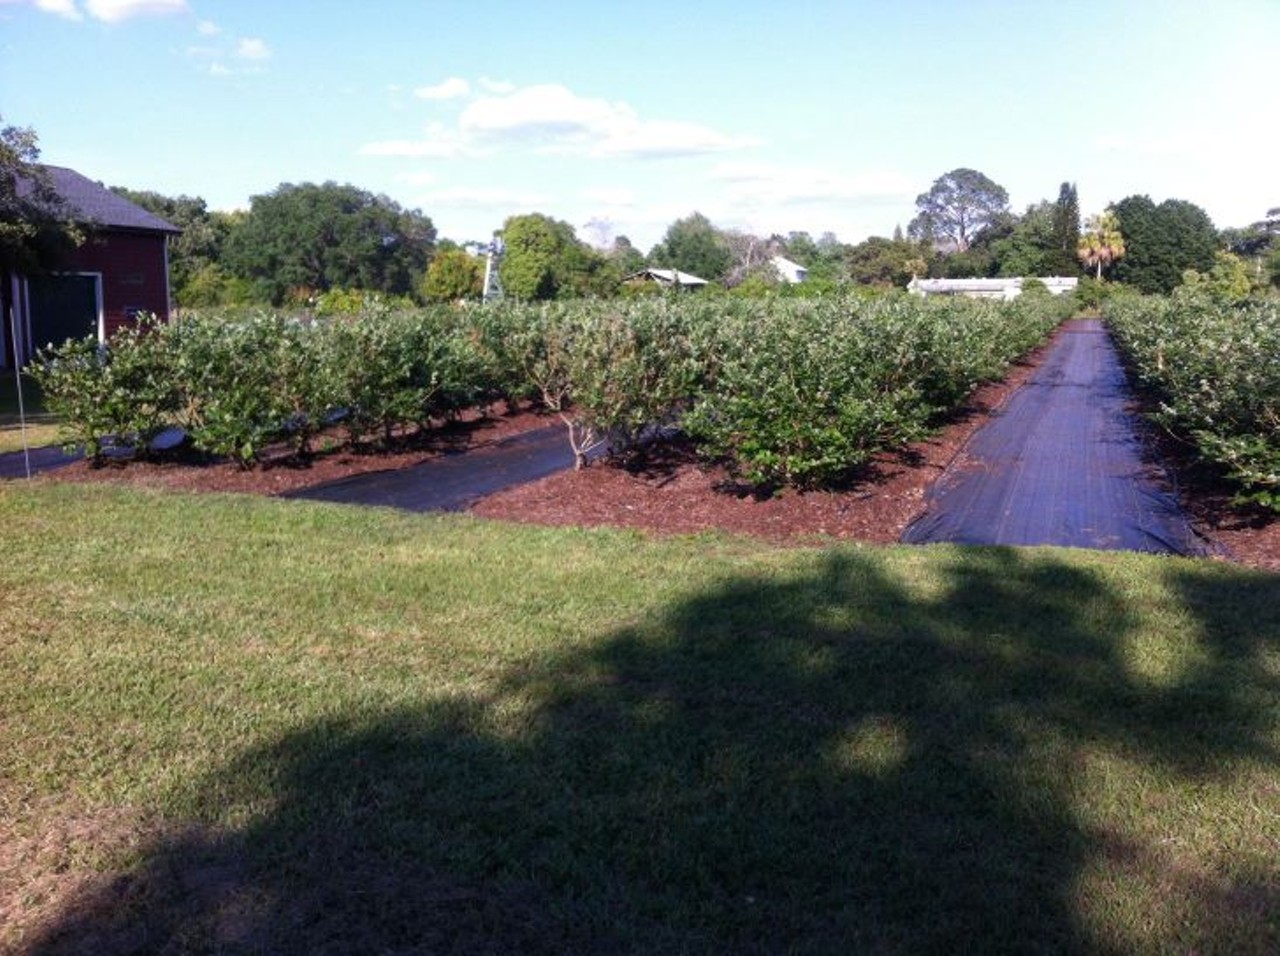 B&G Rucks U-pick blueberries 
1031 Oak Shore Drive, Saint Cloud
B&G has blueberries, but they also have their own honey, guava trees, snap peas and more. Keep an eye on their Facebook page for when they kick off their season.
Photo via B&G Rucks U-pick blueberries/Facebook